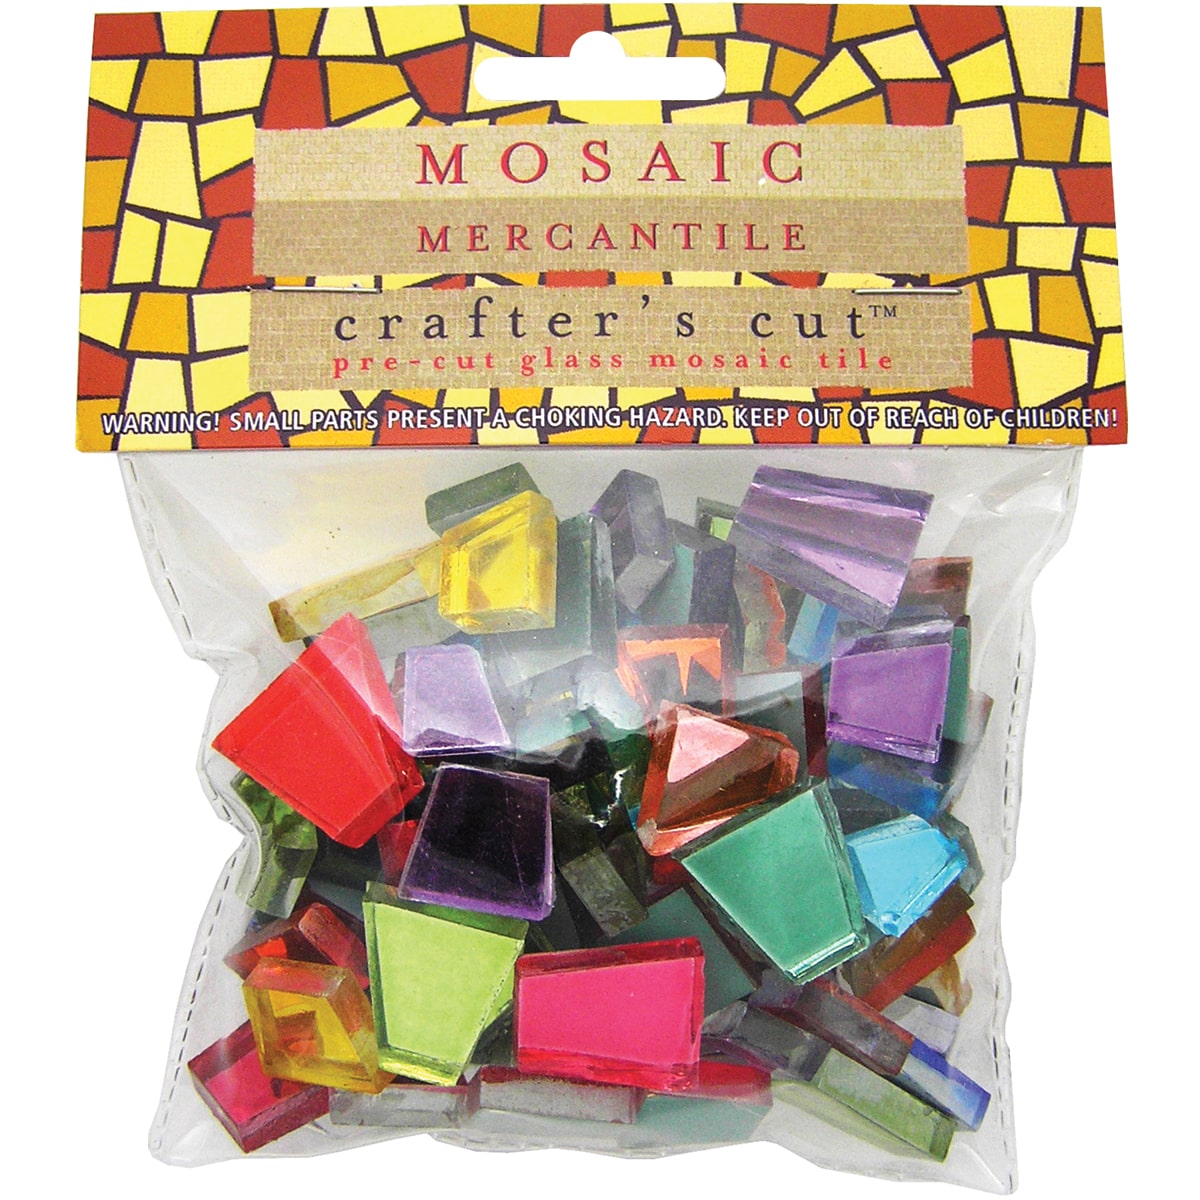 Mosaic Mercantile CC-MR Crafters Cut Colored Mirrors 1-2 Pound-Pkg-Assorted - image 2 of 2